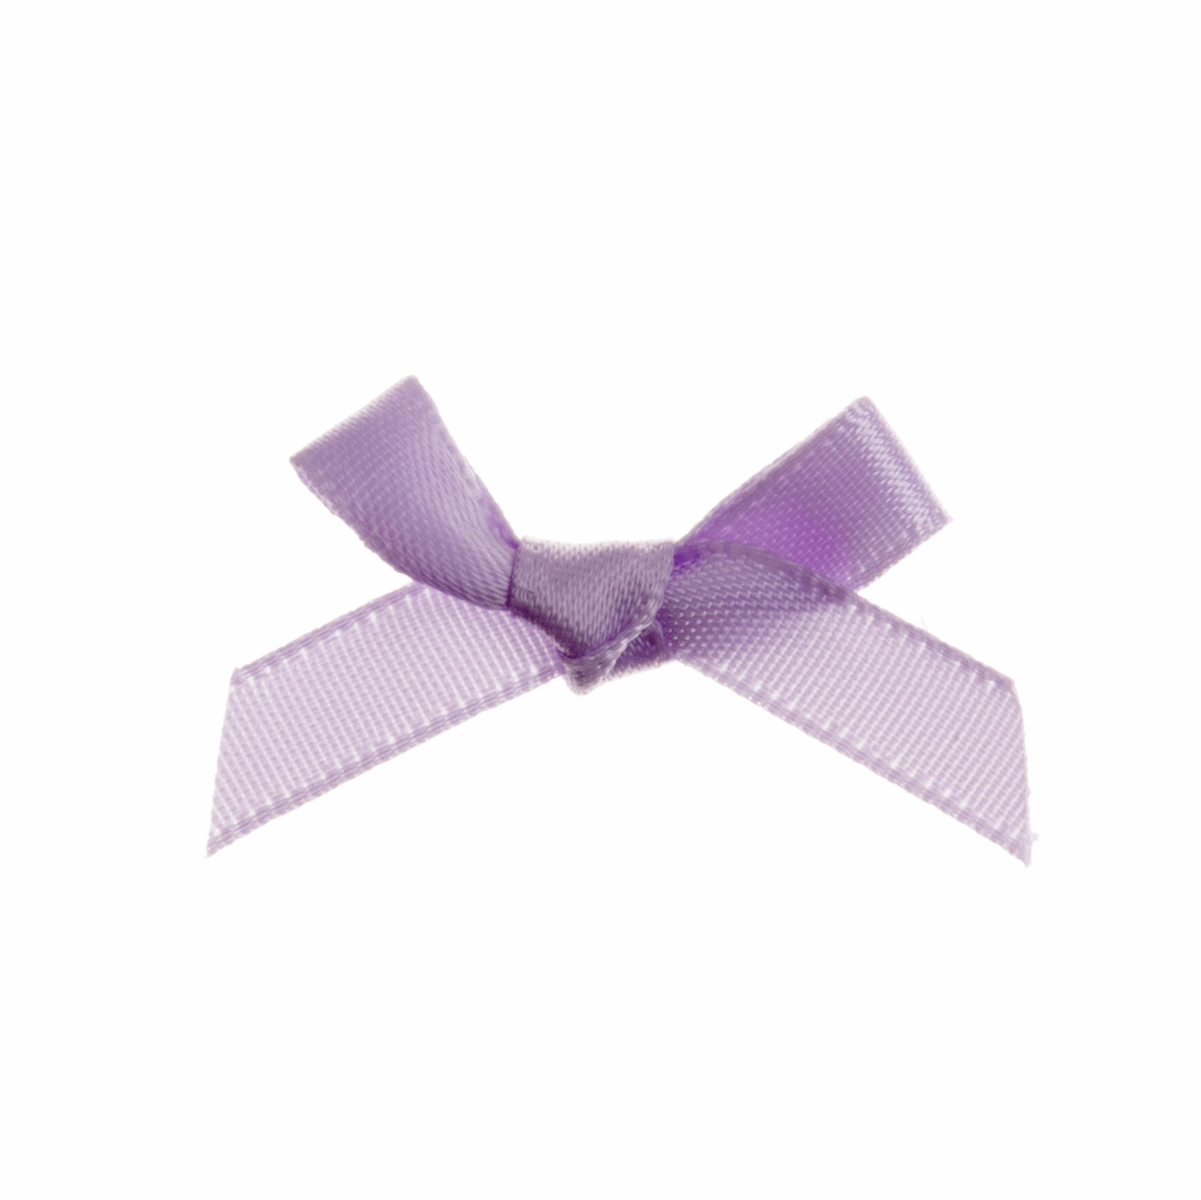 Lilac Mini Satin Bow - 3mm (Pack of 100)